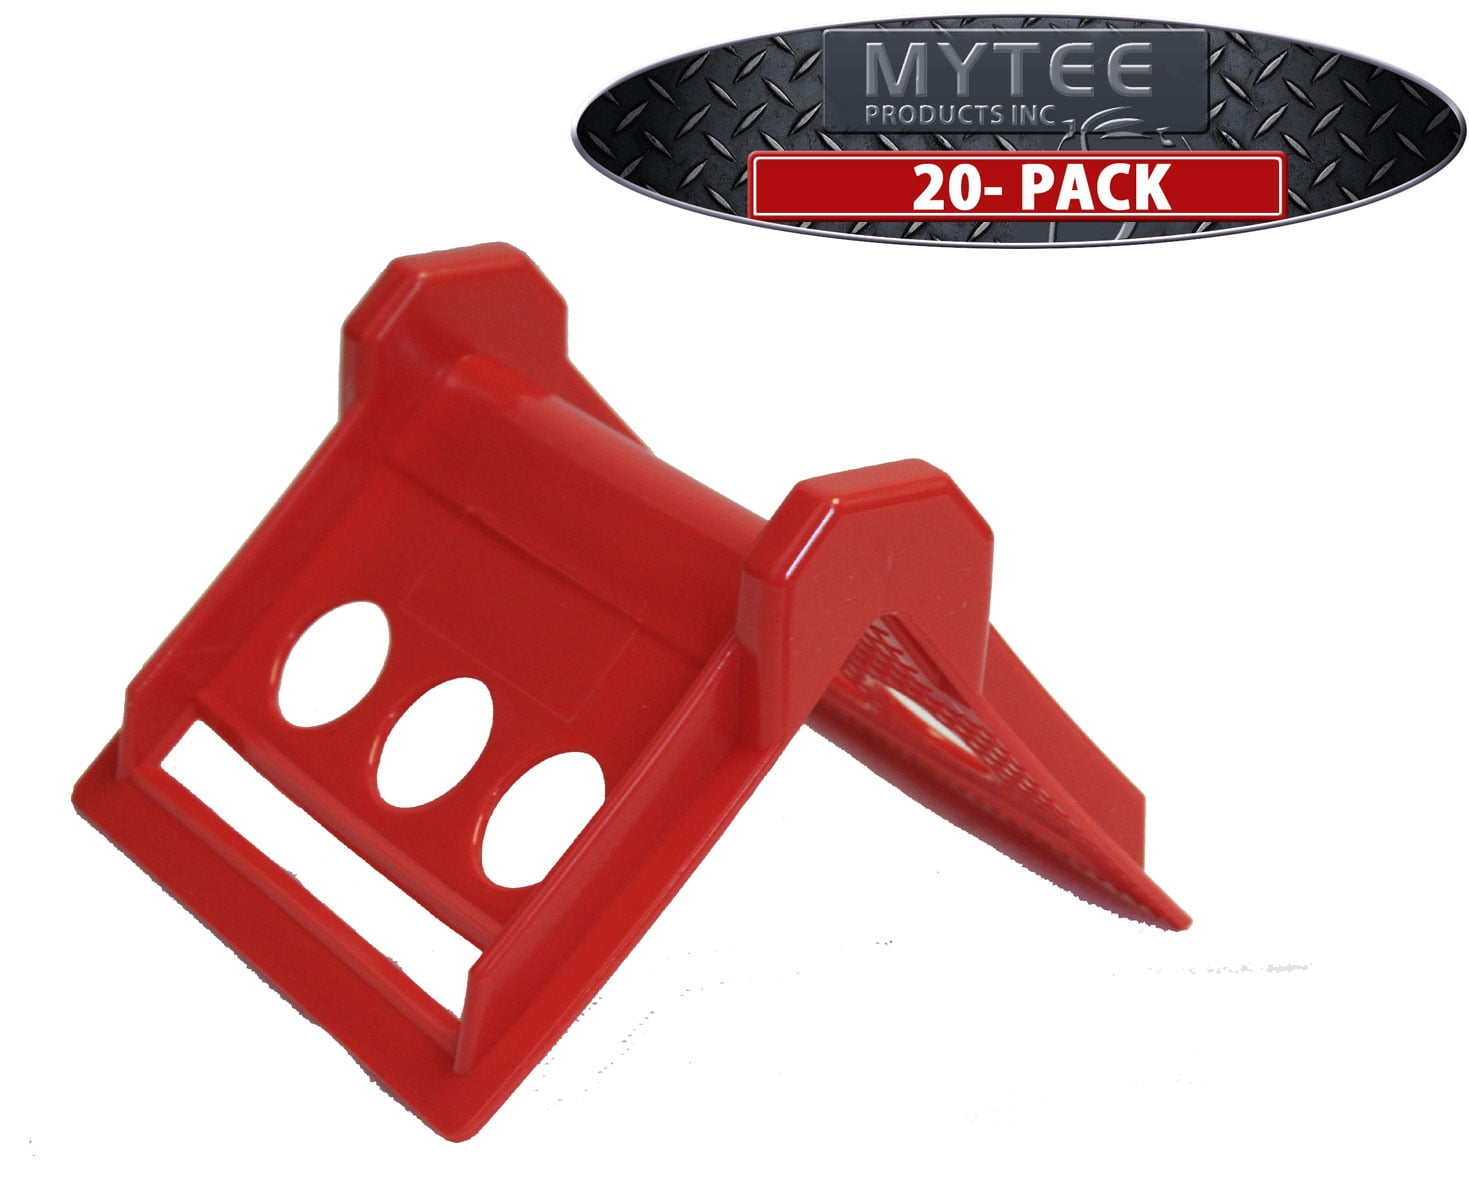 Flatbed Edge Protectors for Up to 4 Inch Straps Protects Cargo Edges,Prevent Damage to The Goods 20 Pack Plastic Edge Corner Tie Down Protectors 